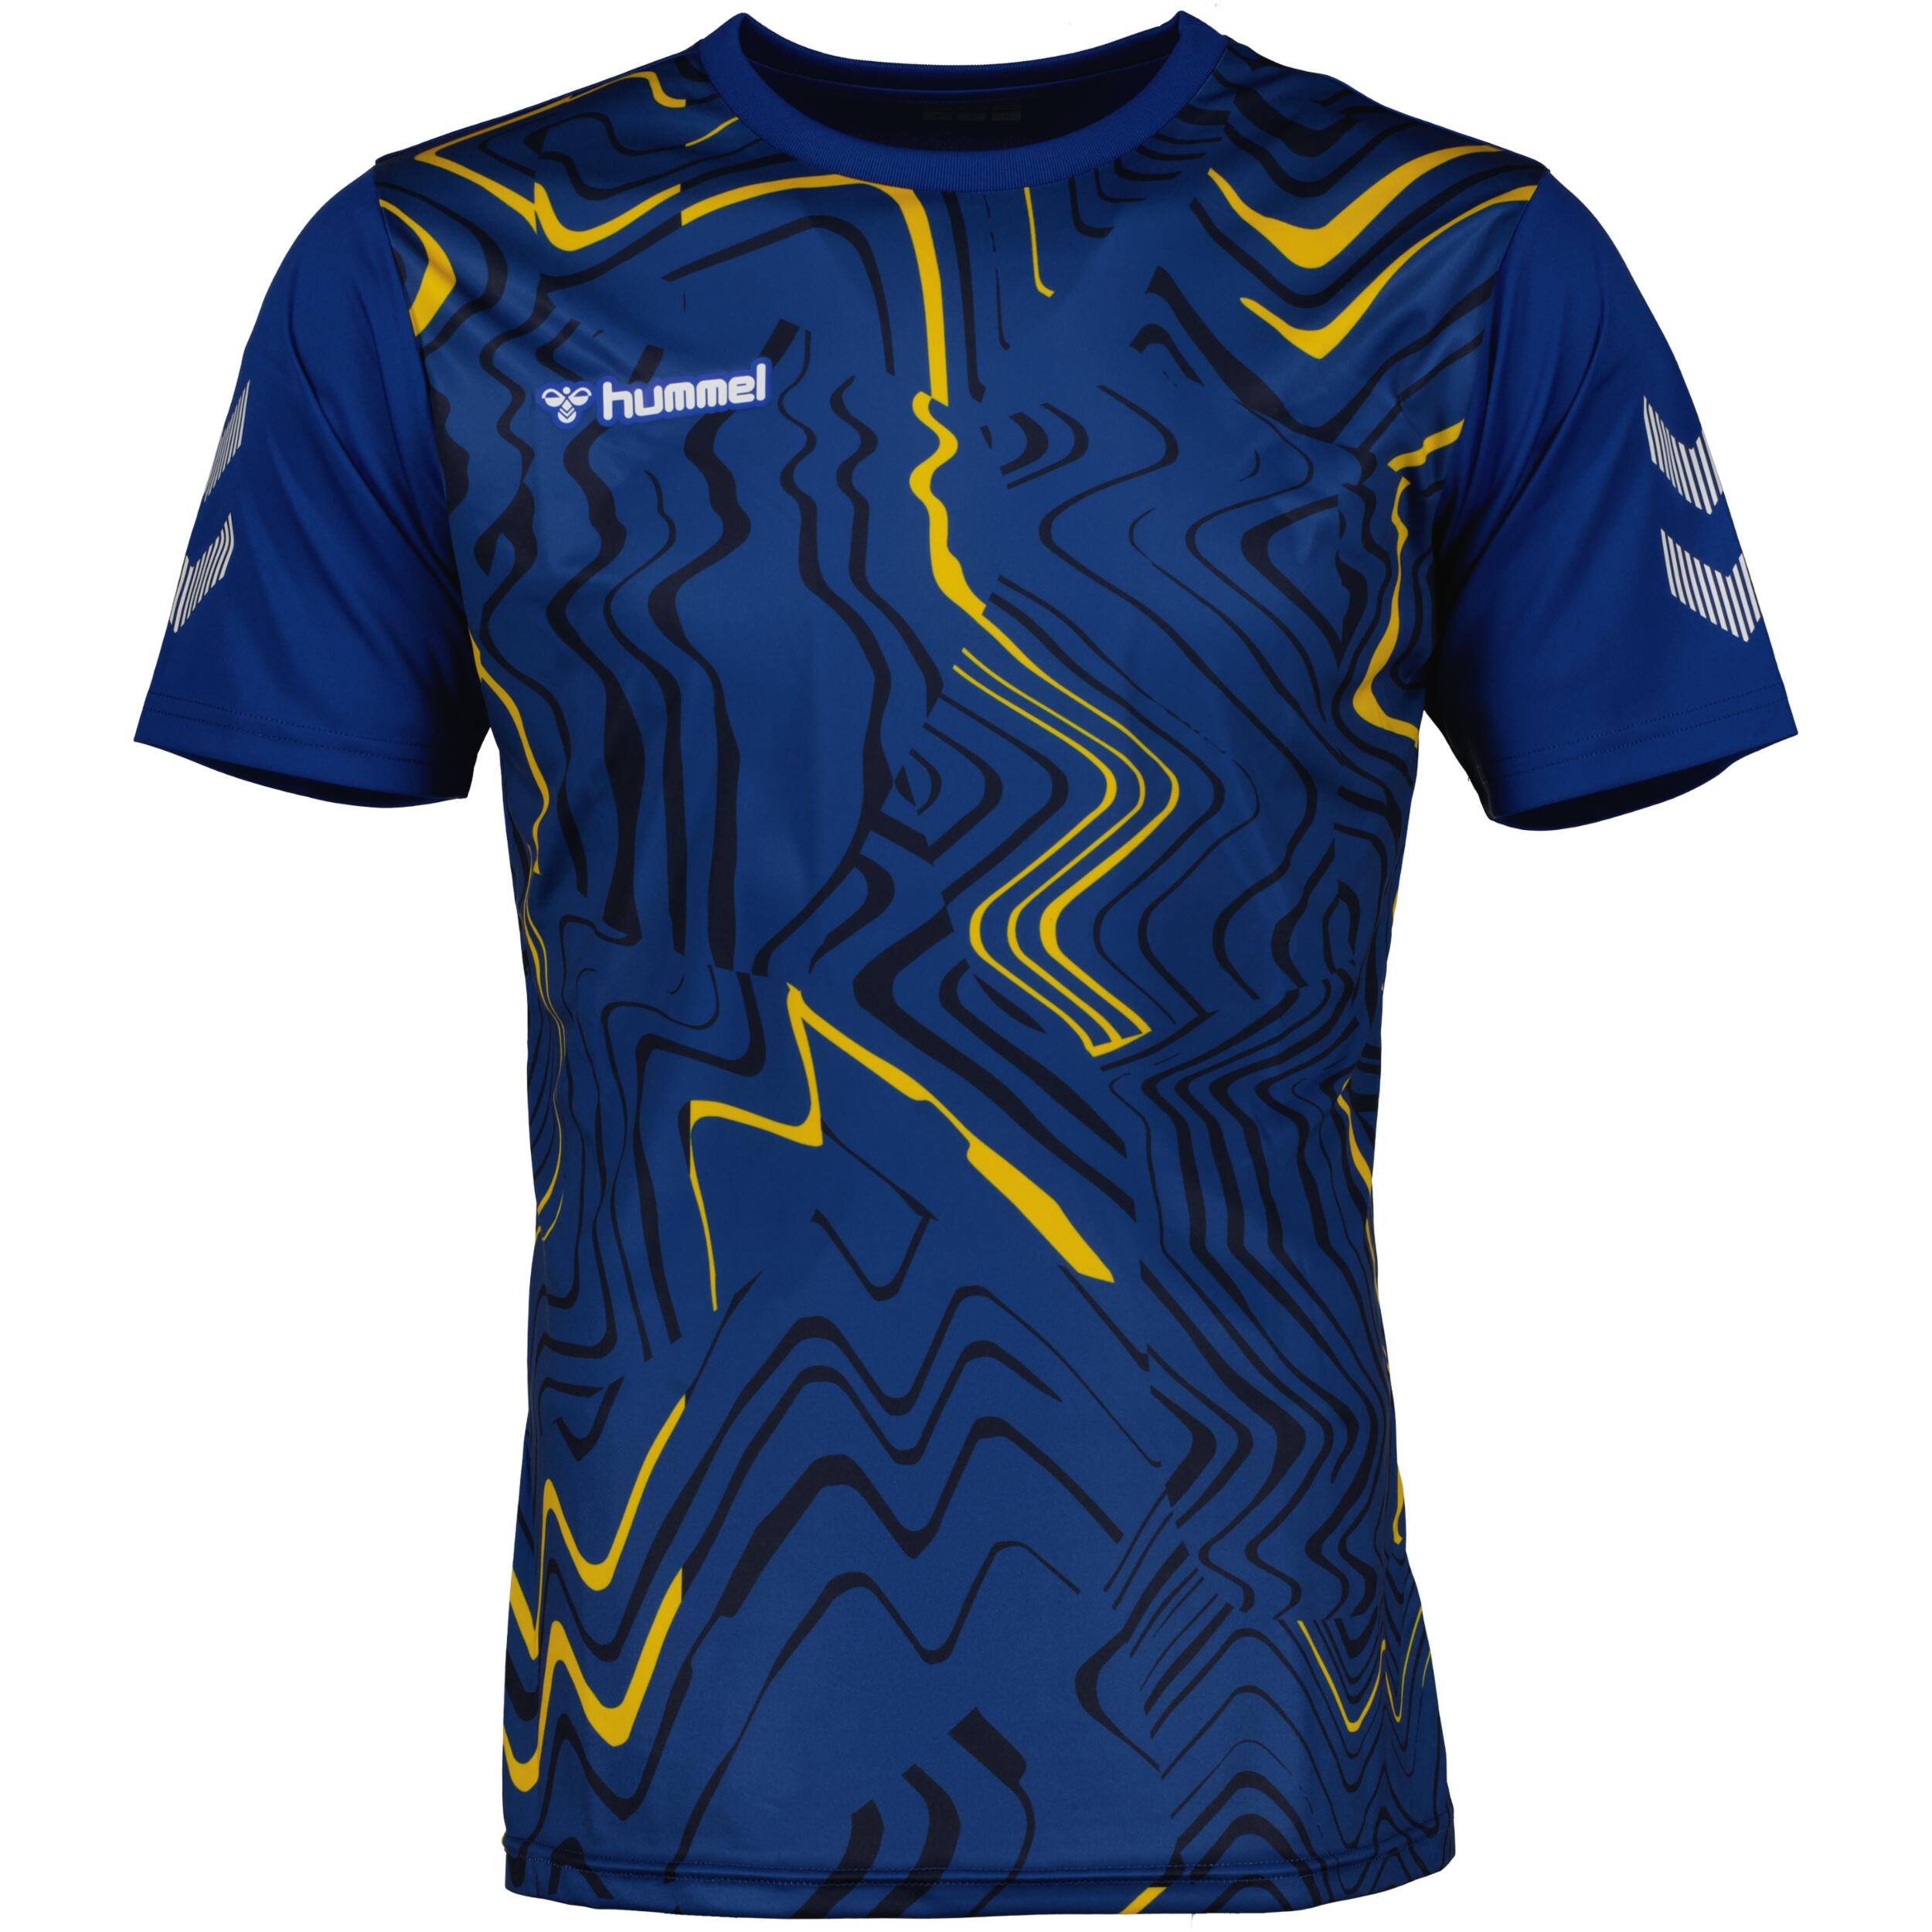 Hydro jersey for men, great for football, in true blue/marine/yellow 1/3